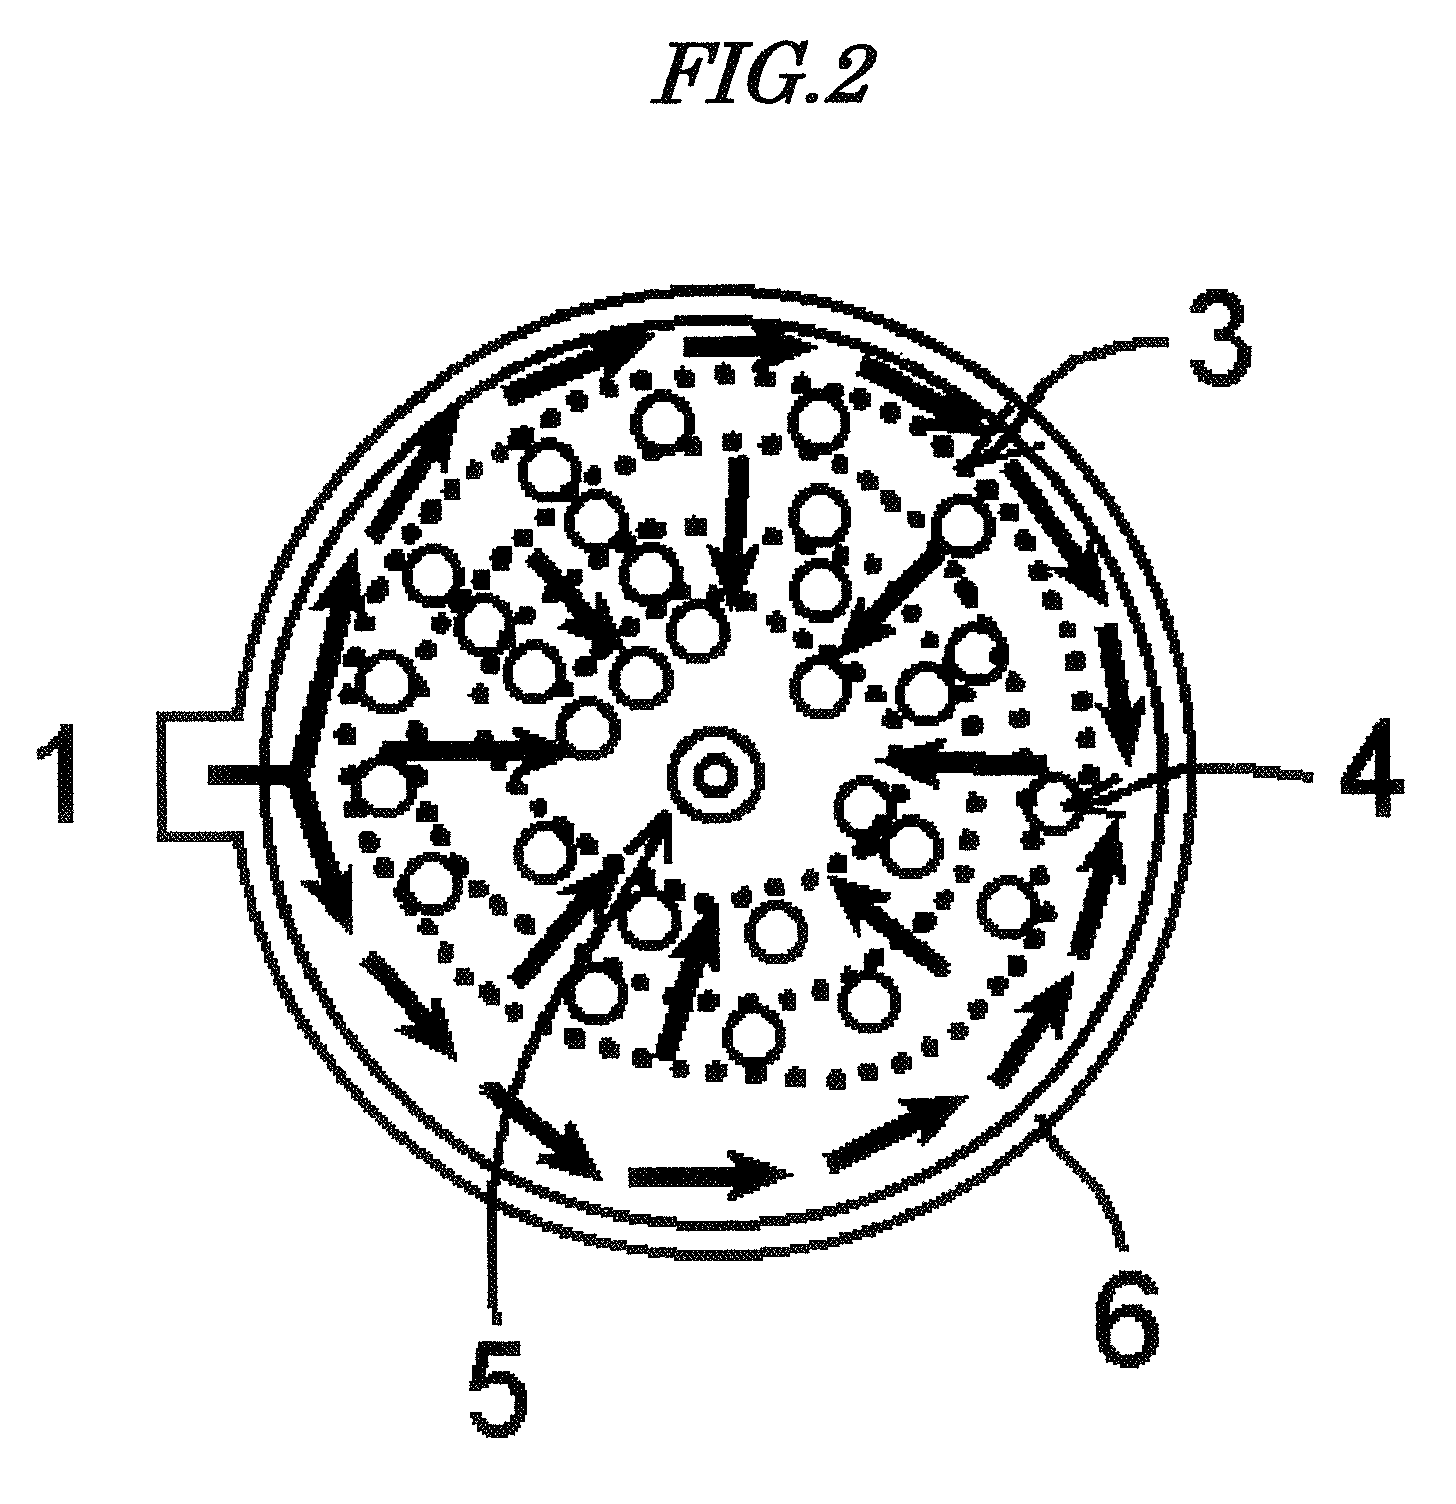 Porous sheet-form material for cell culture, and bioreactor and culturing method utilizing same